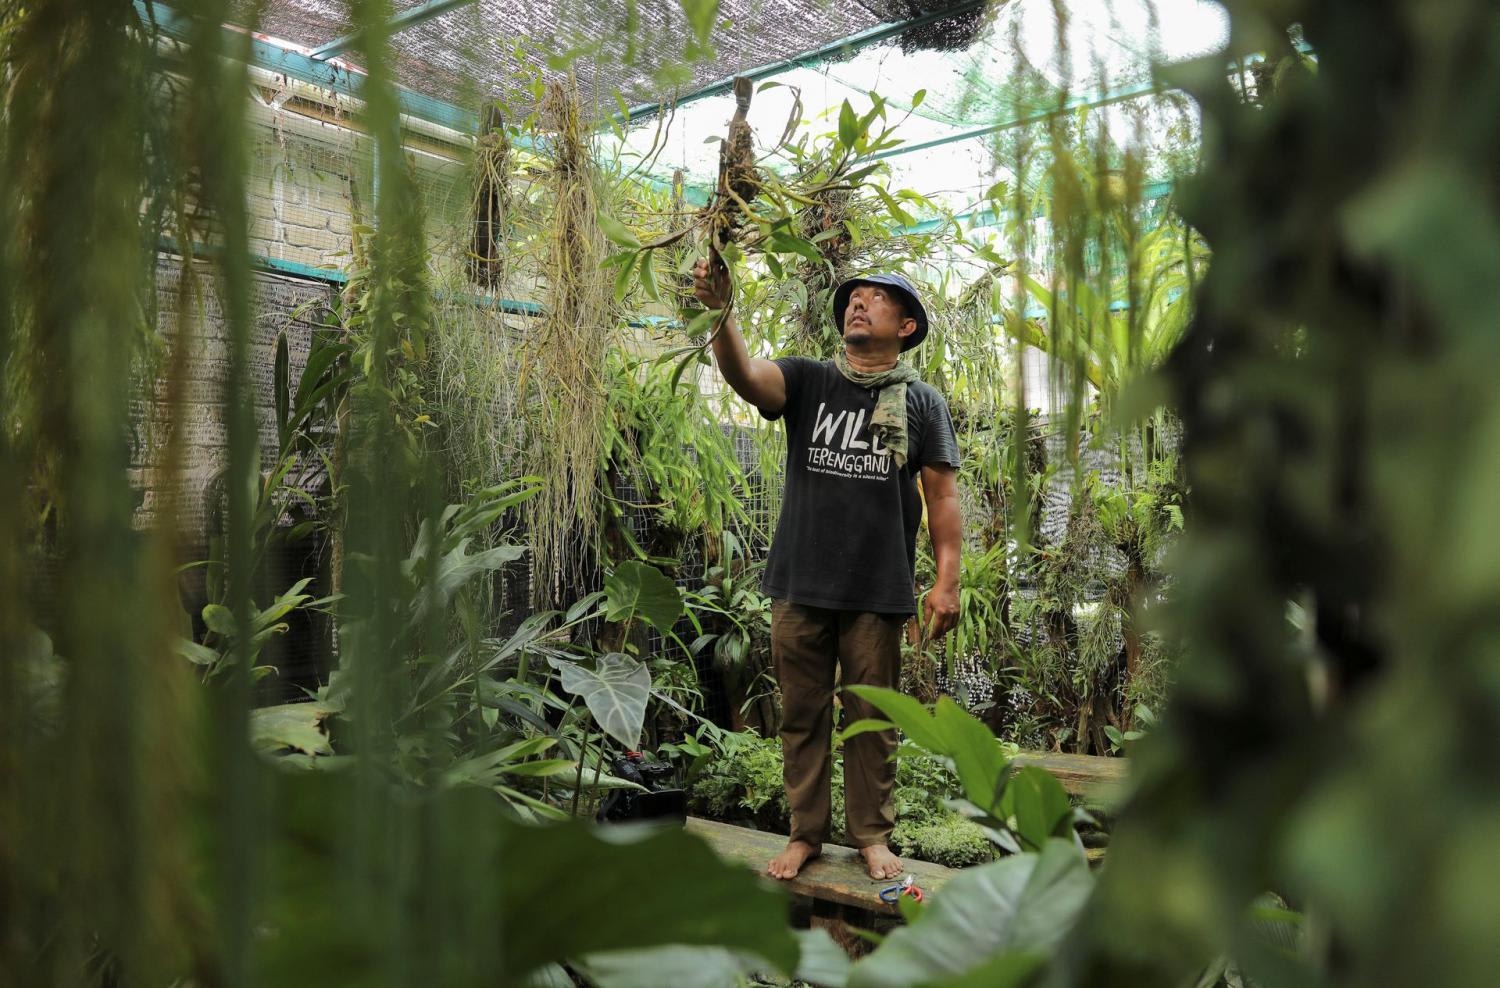 Mr Suzairi Zakaria — also known as Dome — checks one of his plants he rescued from a logging area, at his conservatory, WildDome Research and Conservation Centre in Besut, Terengganu, Malaysia on May 29, 2022.